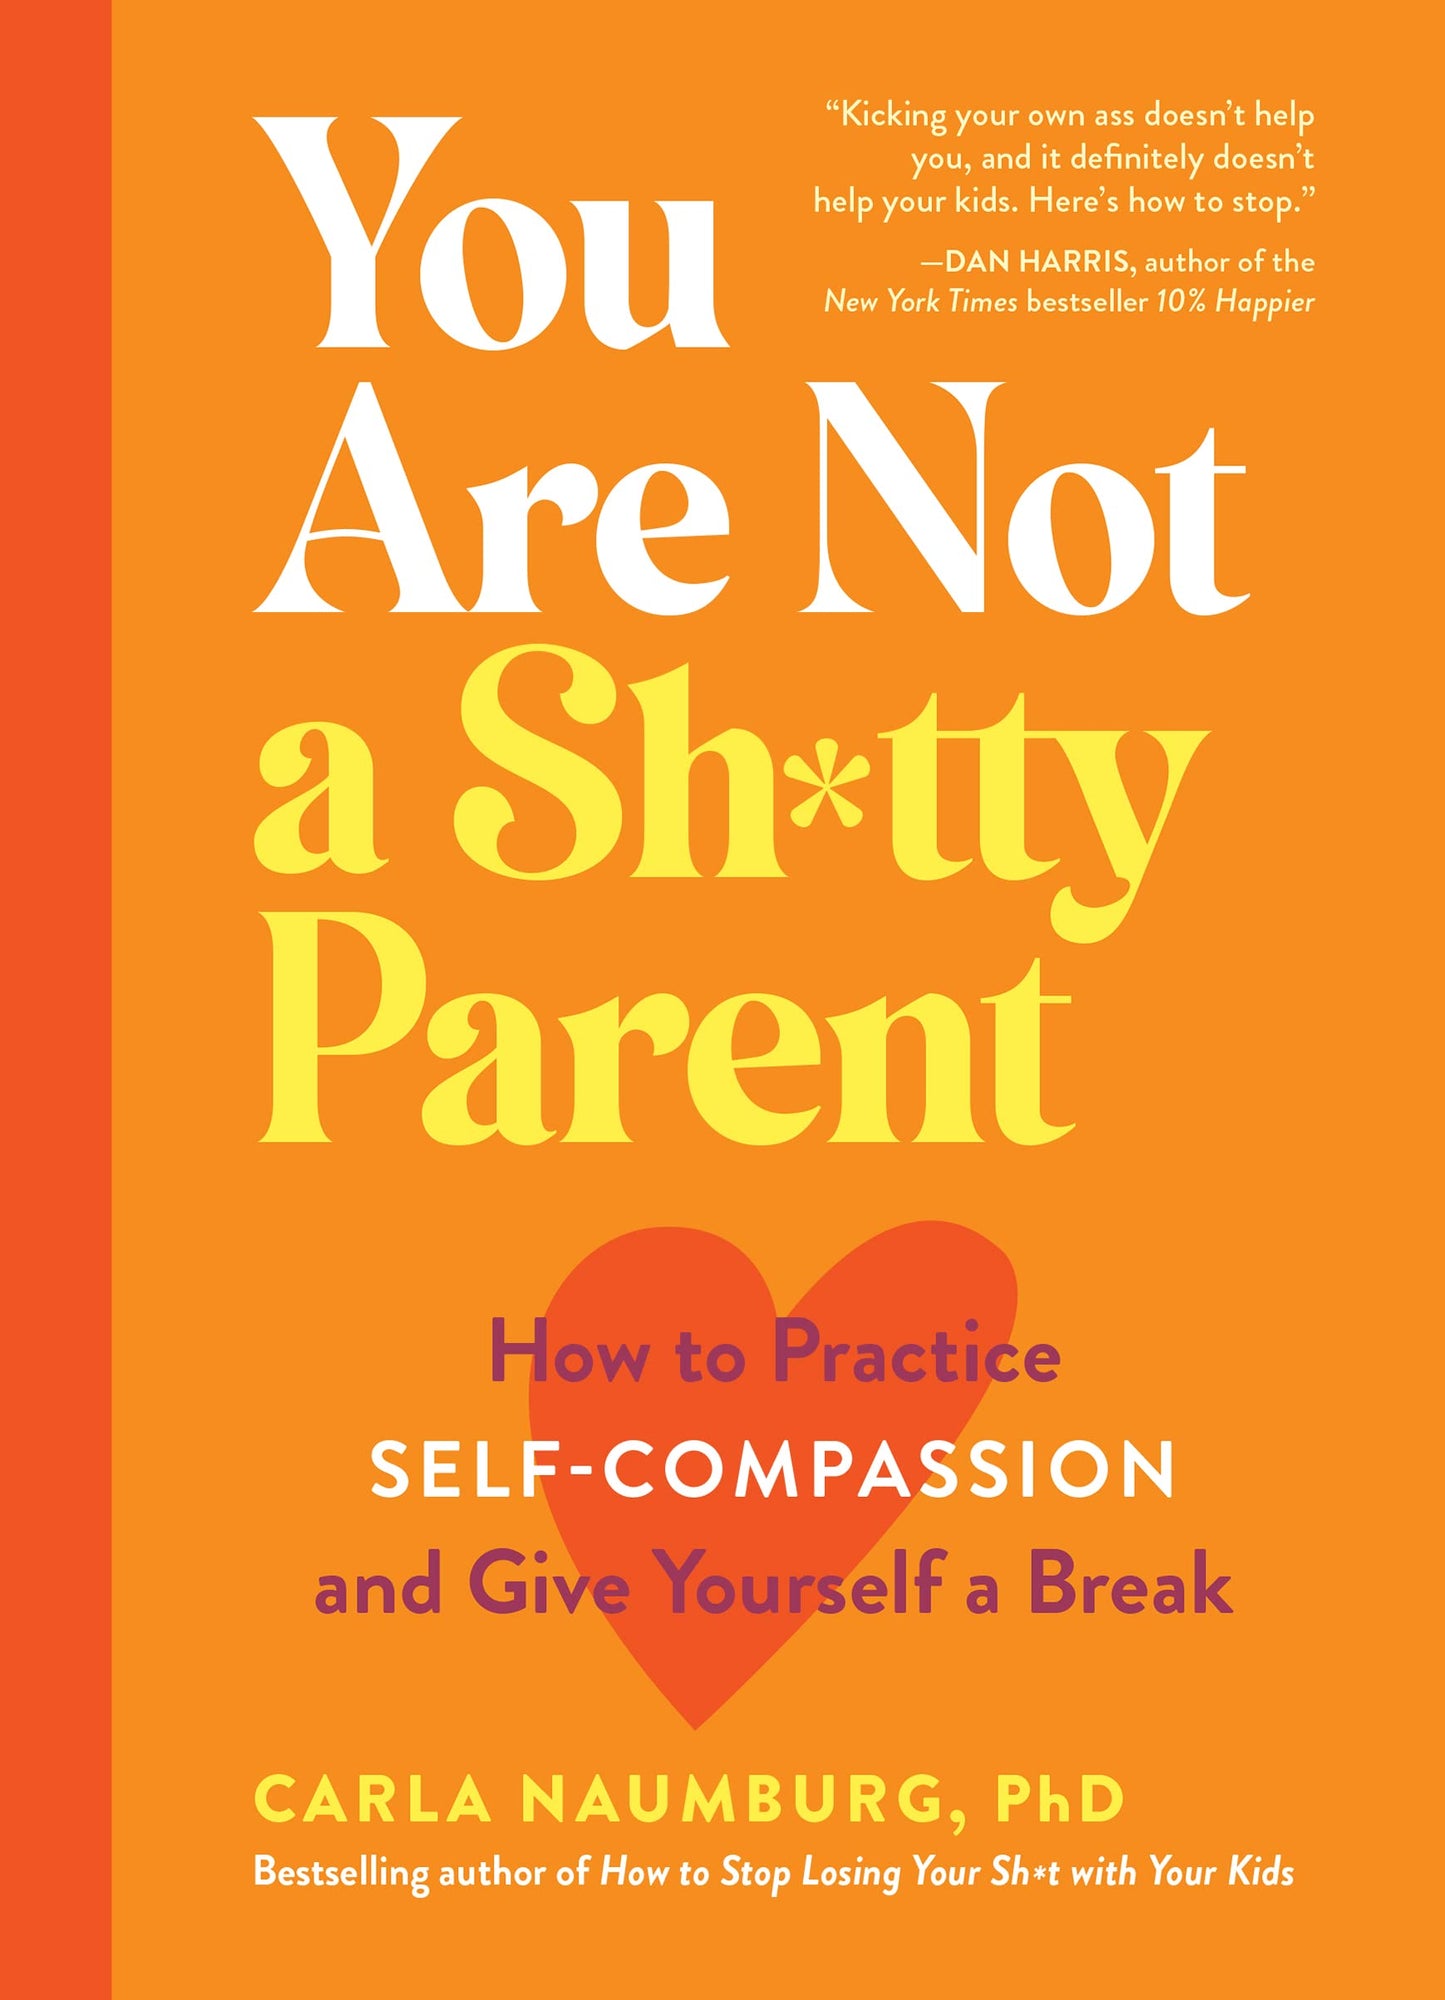 You Are Not a Shitty Parent, by Carla Naumburg